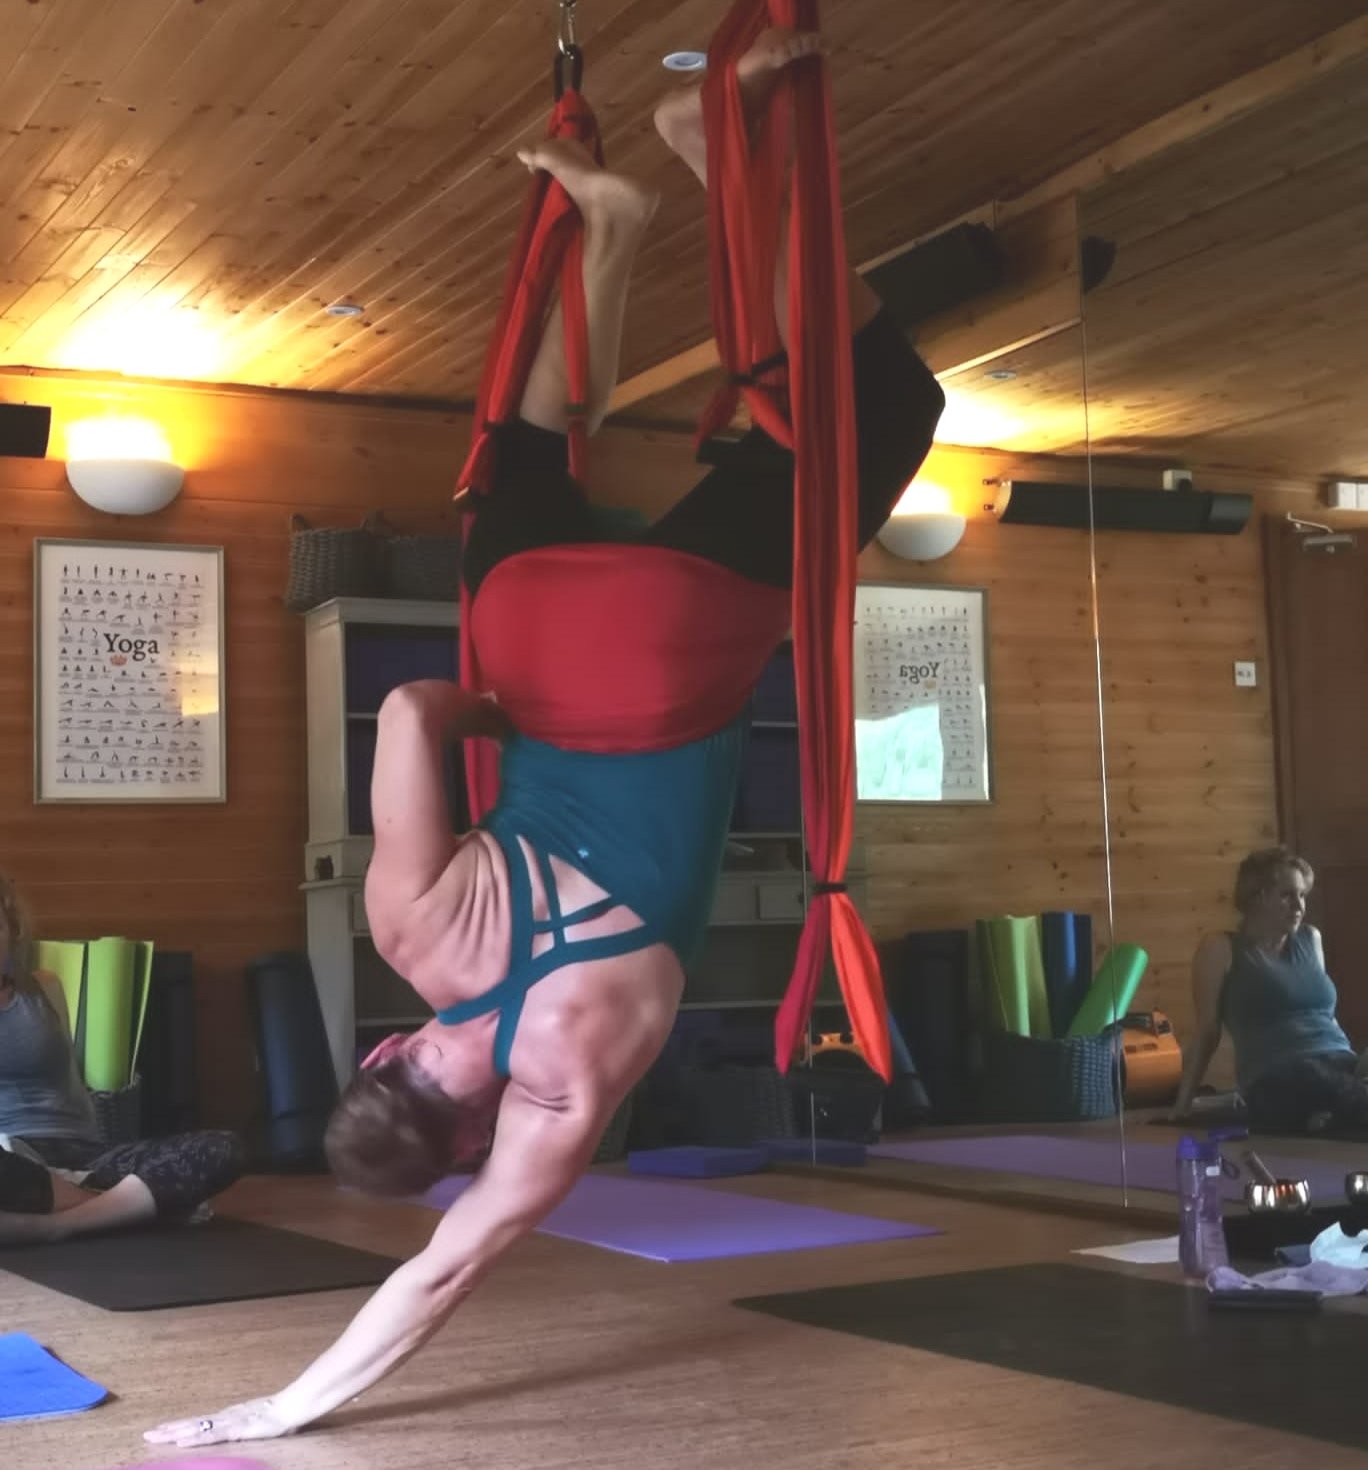 About — Hot Yoga in the Cabin